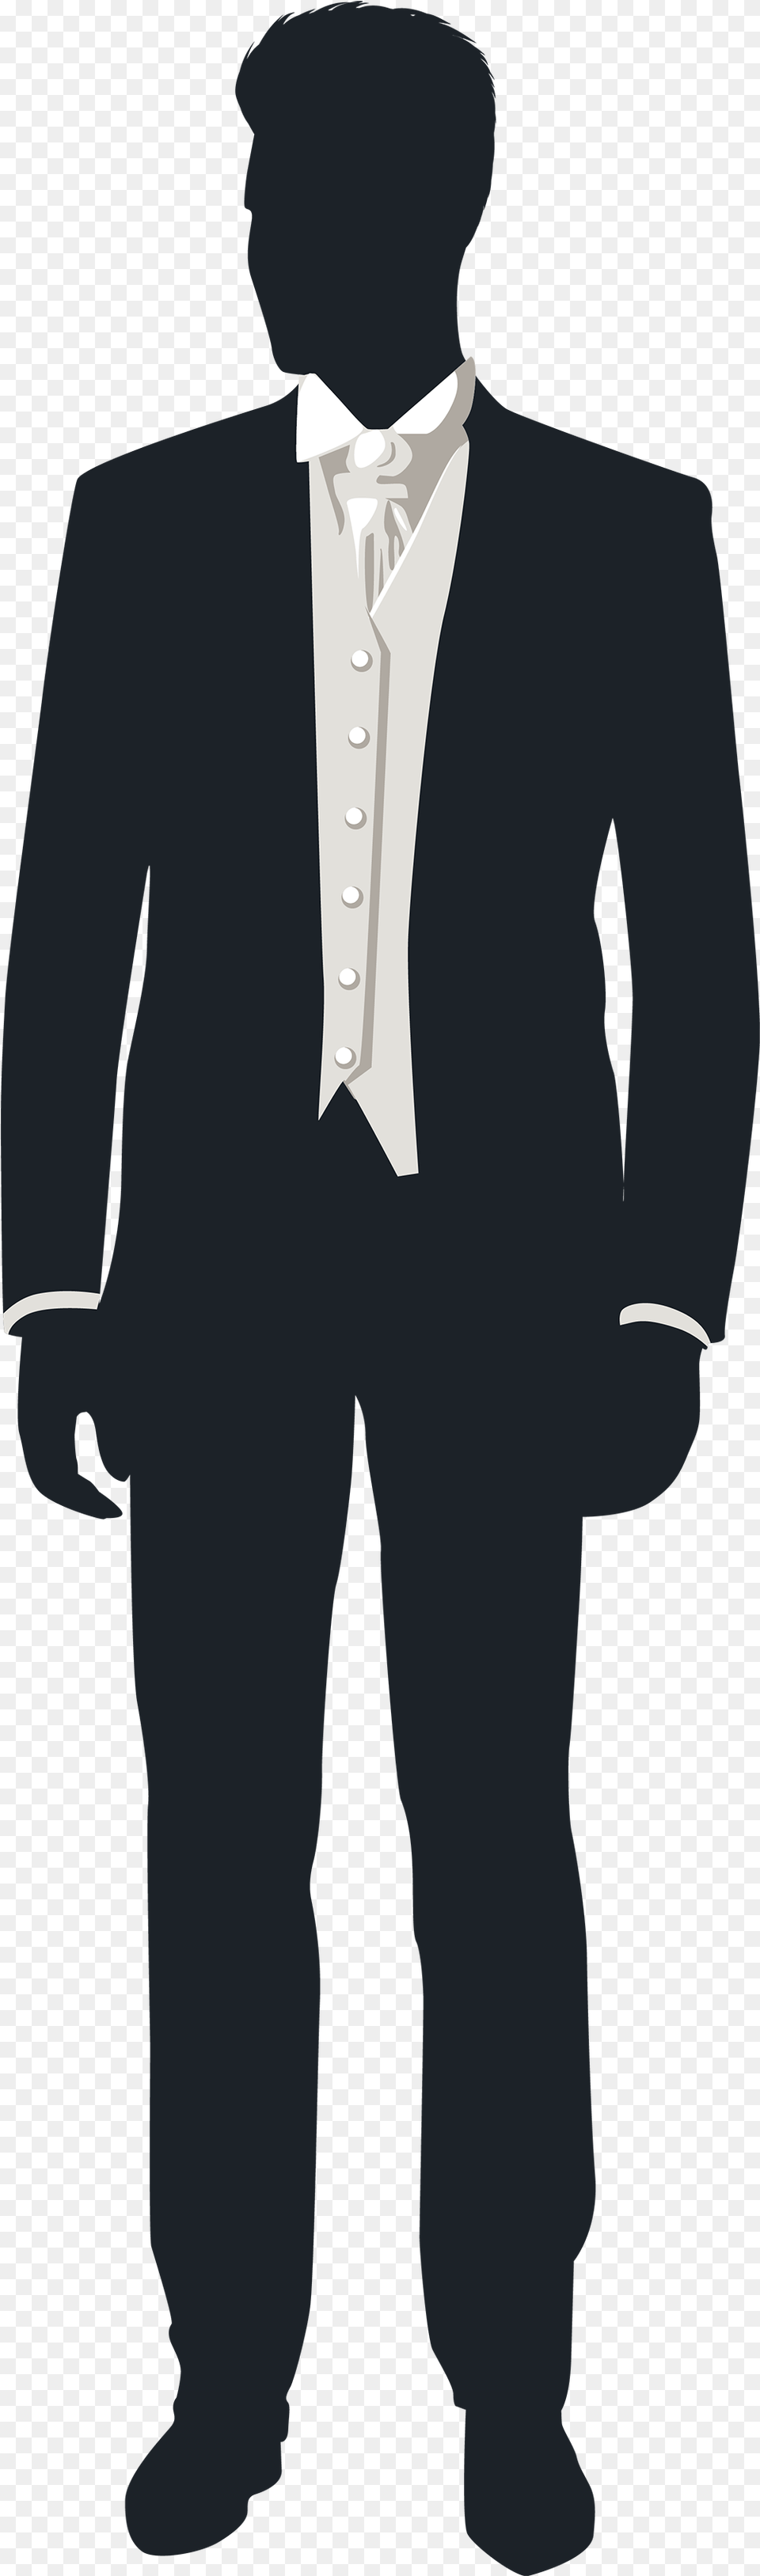 Groom Clipart, Accessories, Tuxedo, Clothing, Formal Wear Png Image